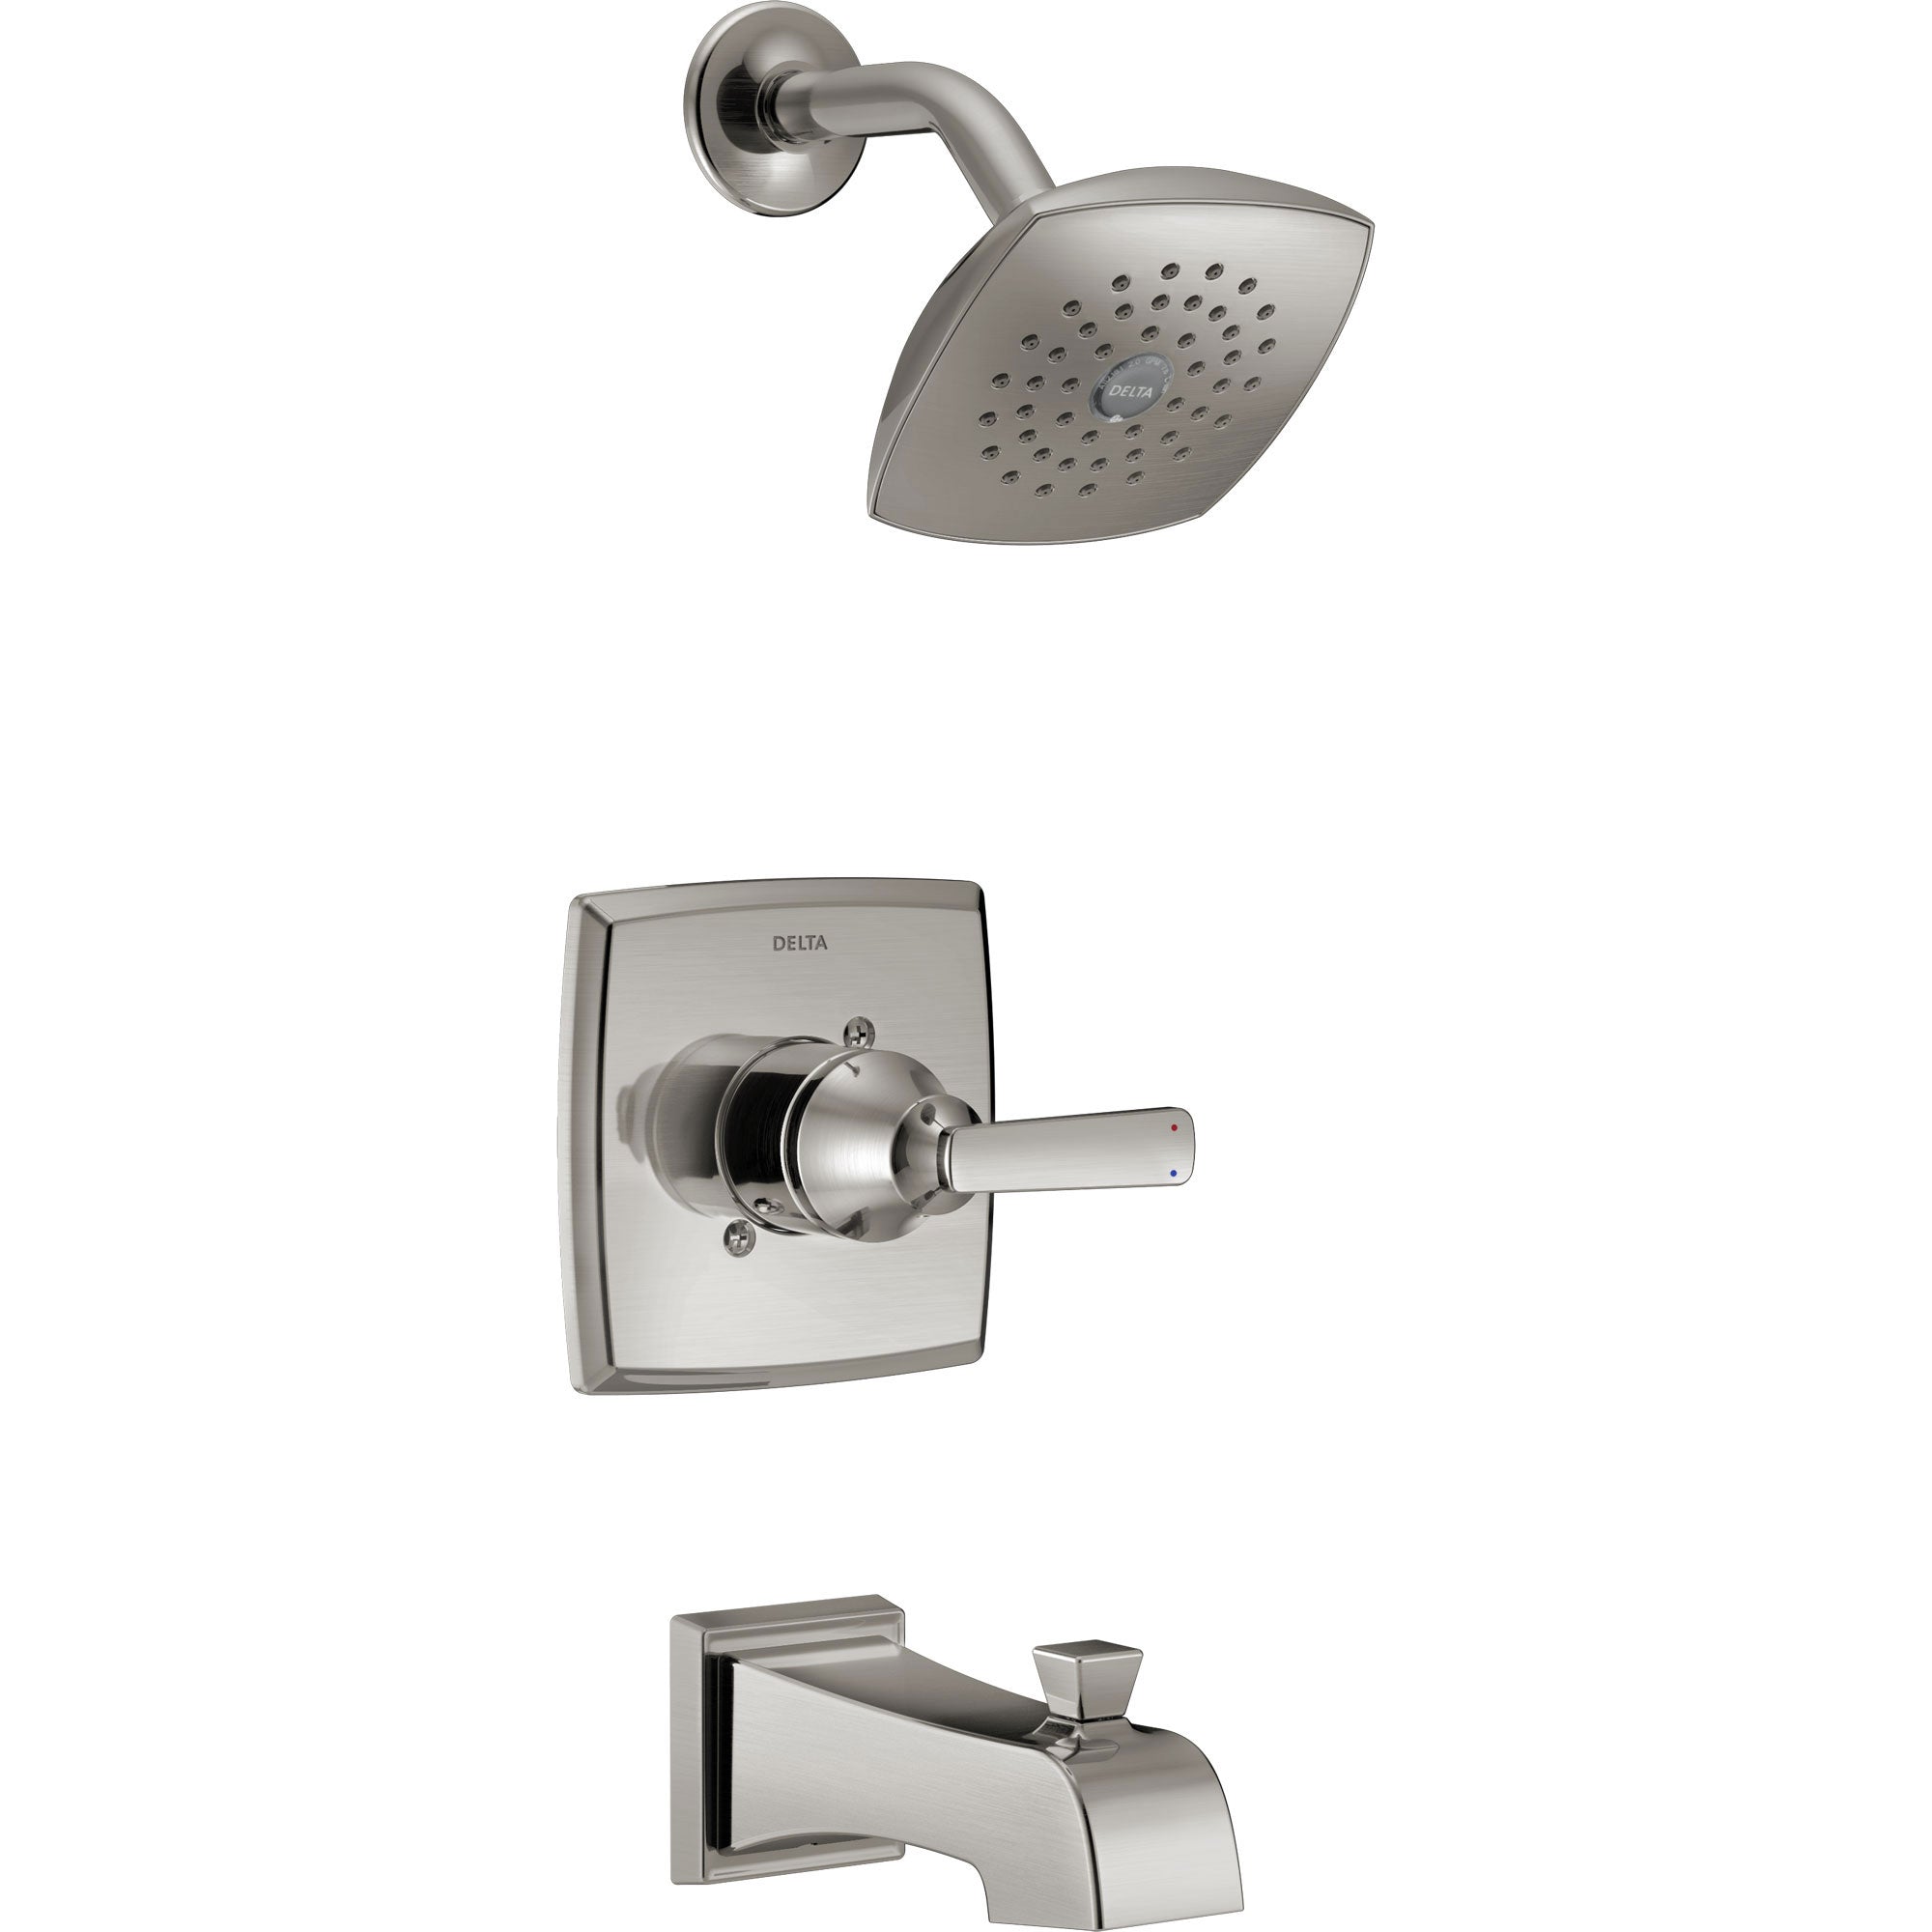 Delta Ashlyn Modern Stainless Steel Finish 14 Series Watersense Single Handle Tub and Shower Combination Faucet INCLUDES Rough-in Valve D1170V